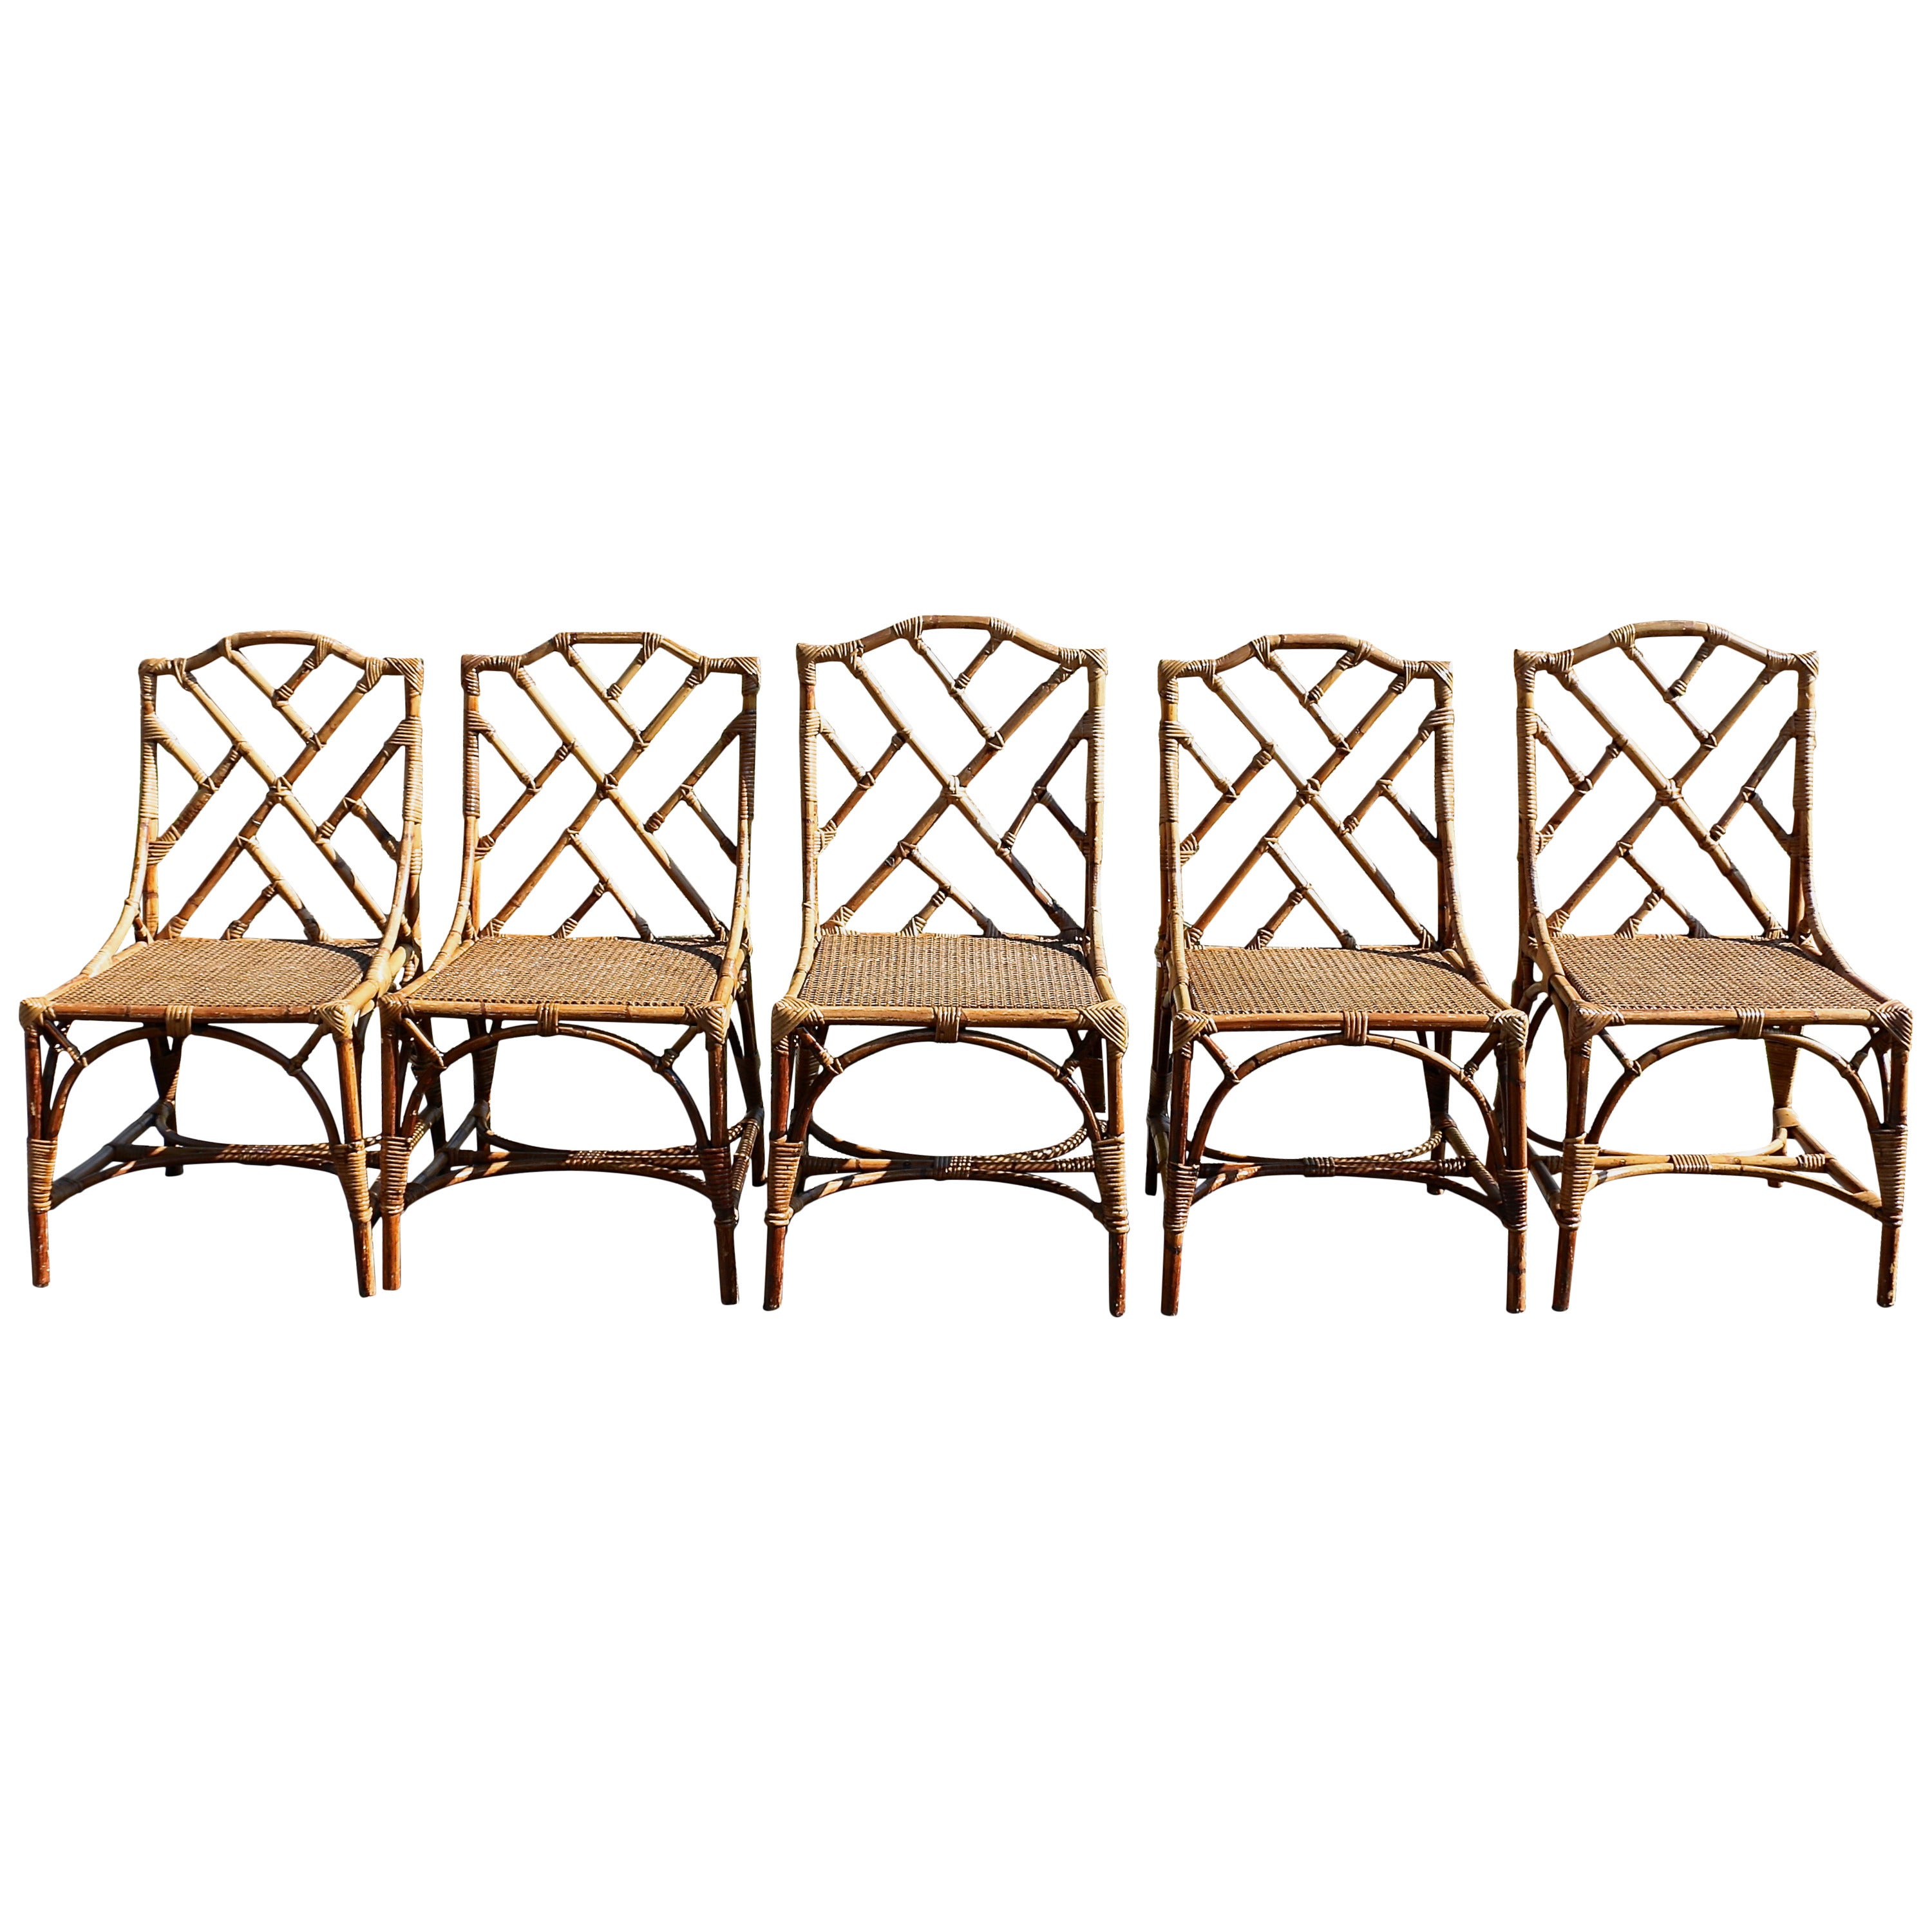 Six Bamboo Chairs with Canned Seats